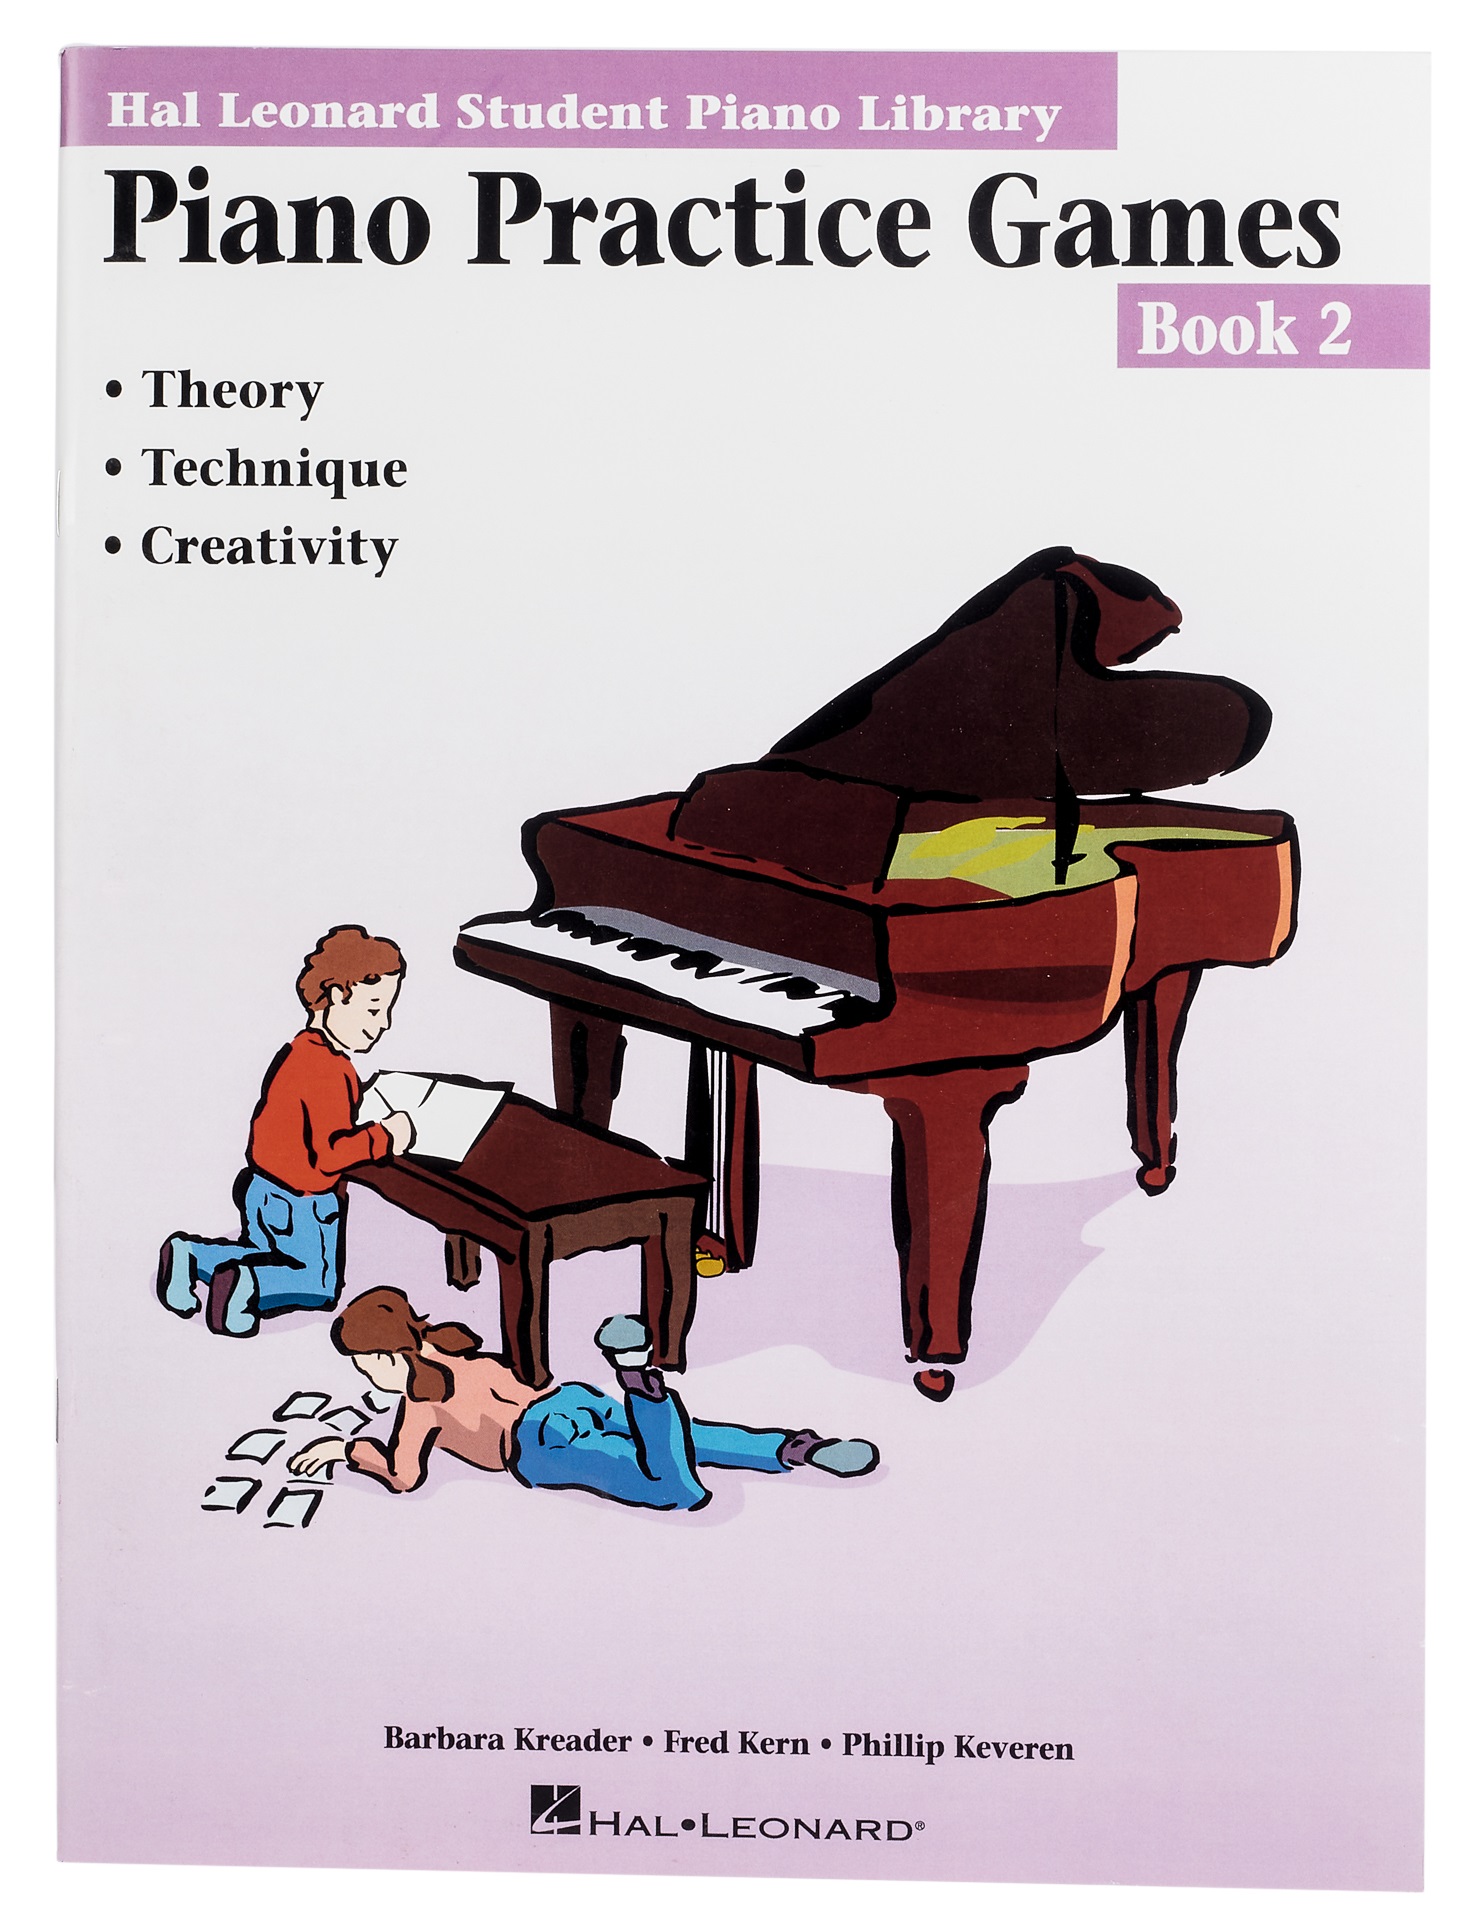 MS Hal Leonard Student Piano Library: Piano Practice Games Book 2